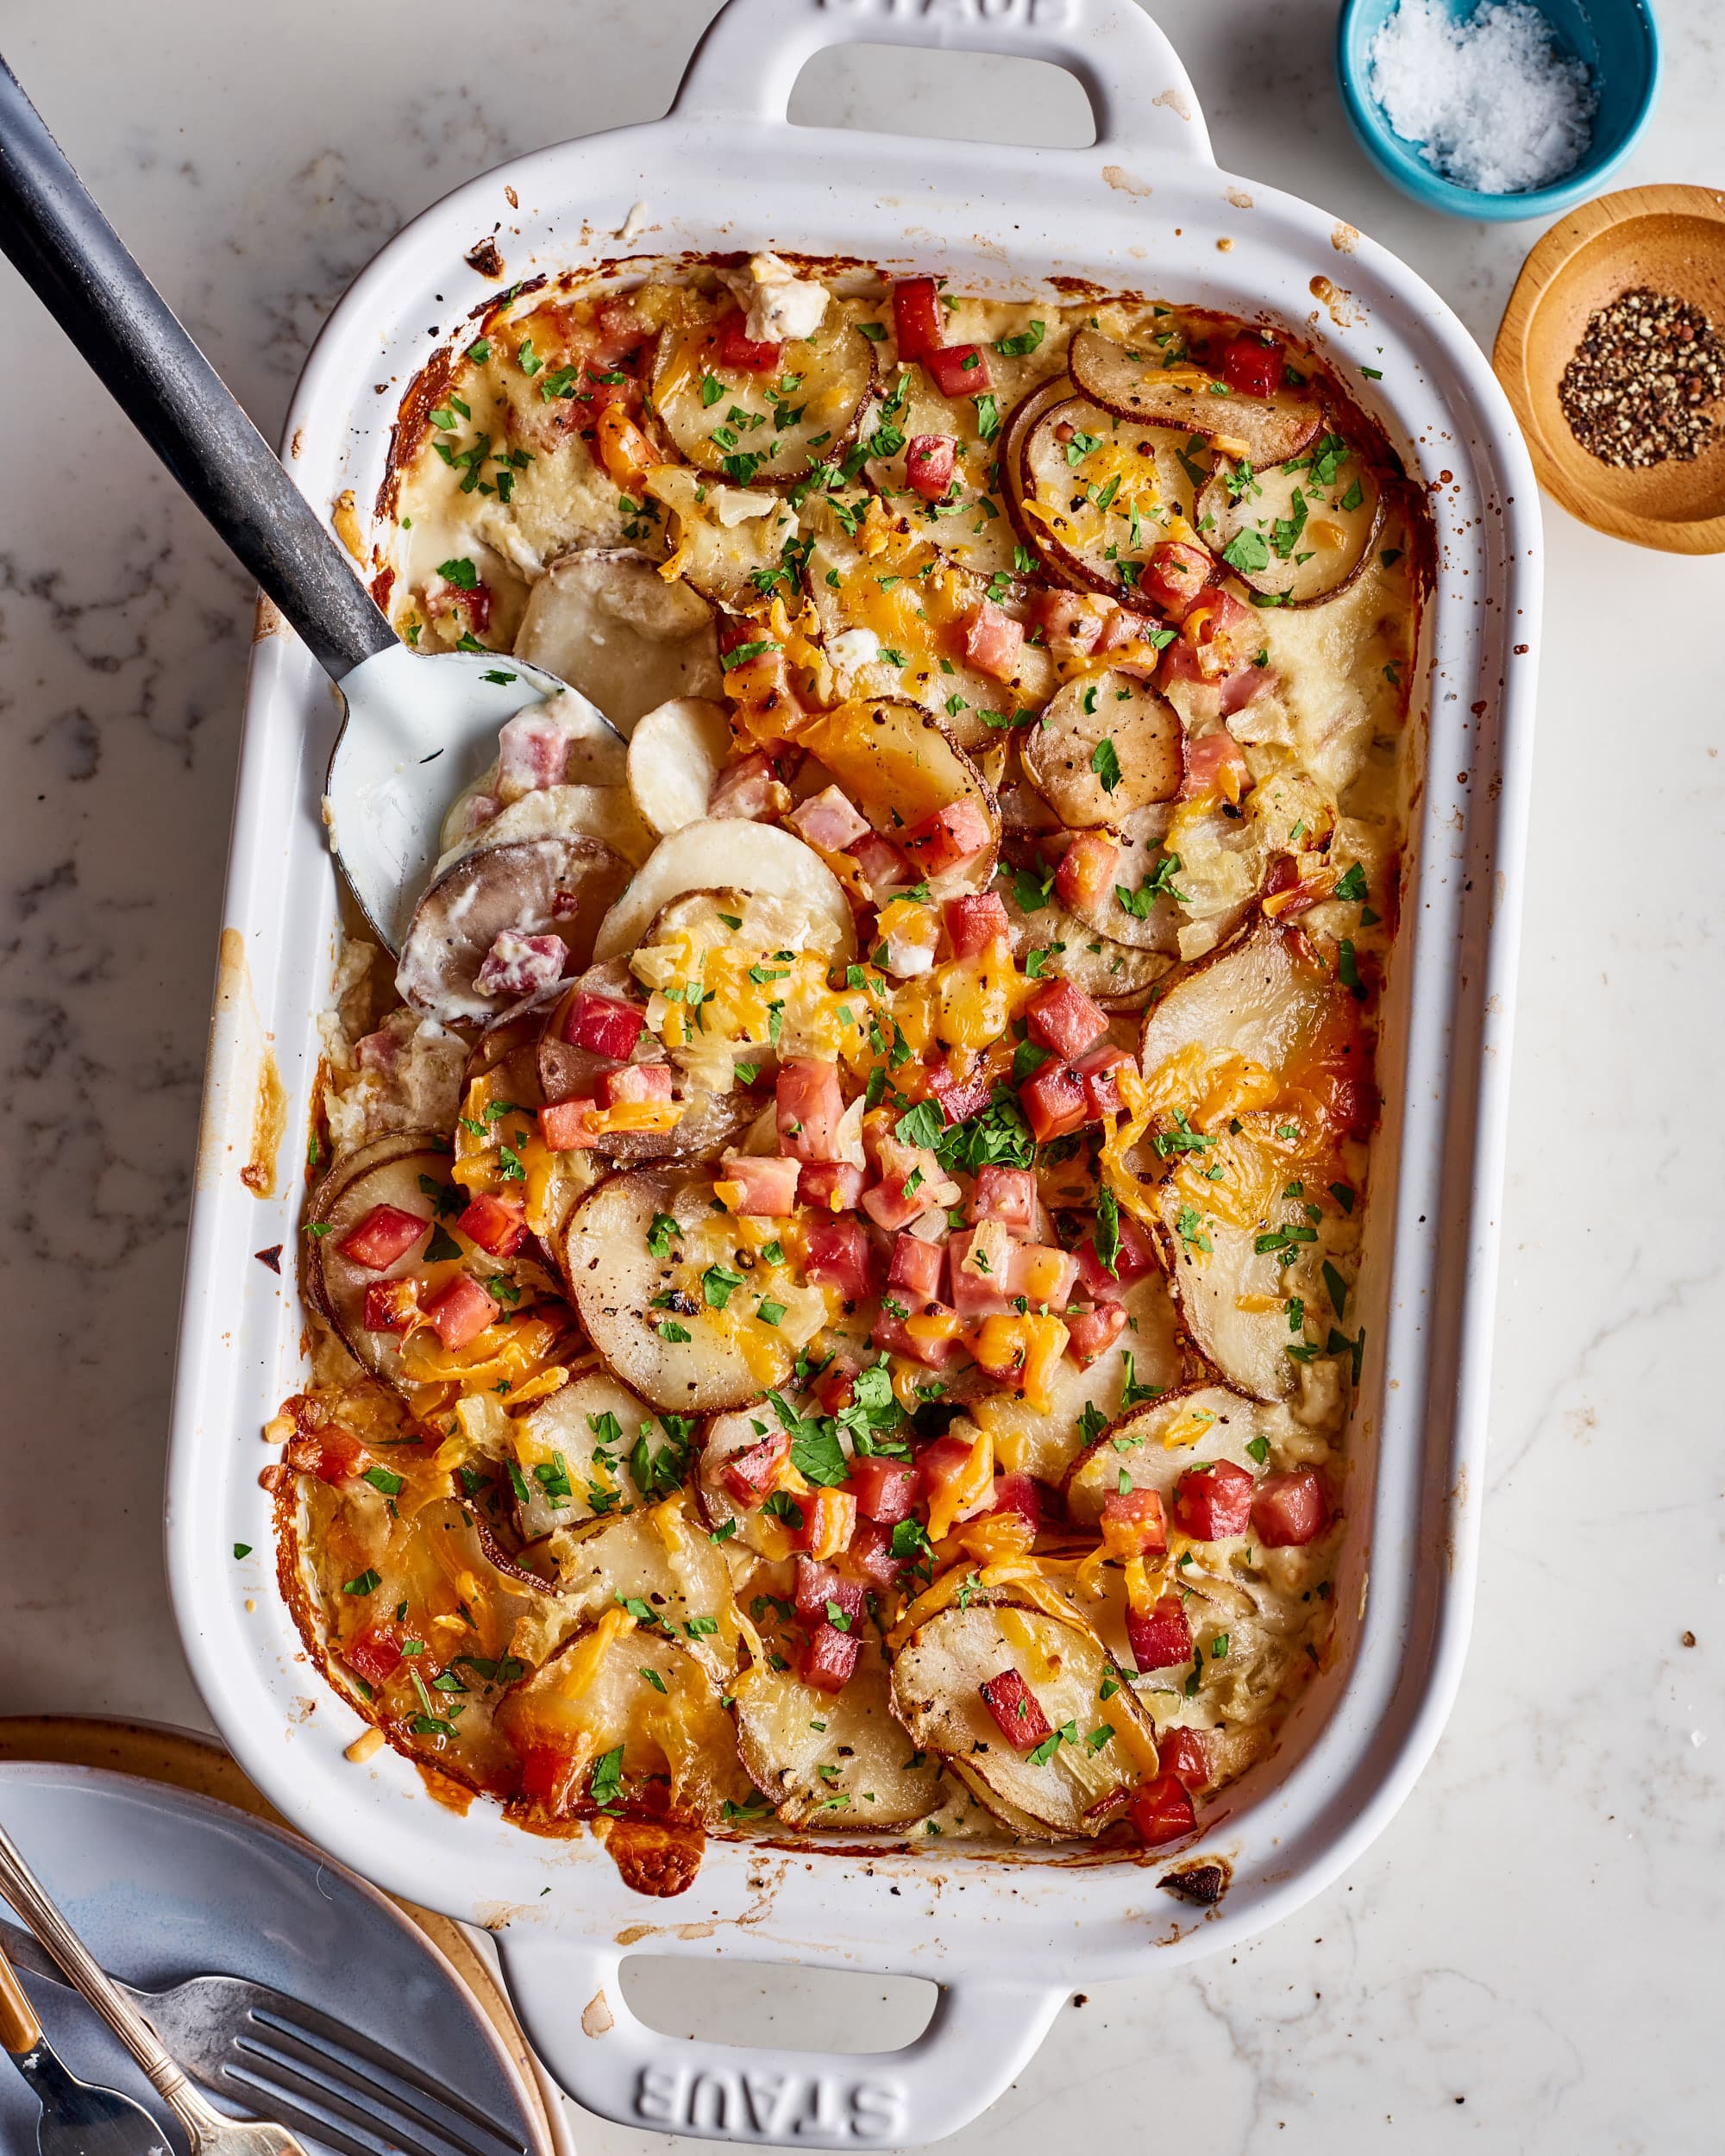 The BEST Scalloped Potatoes Recipe! - Chef Savvy